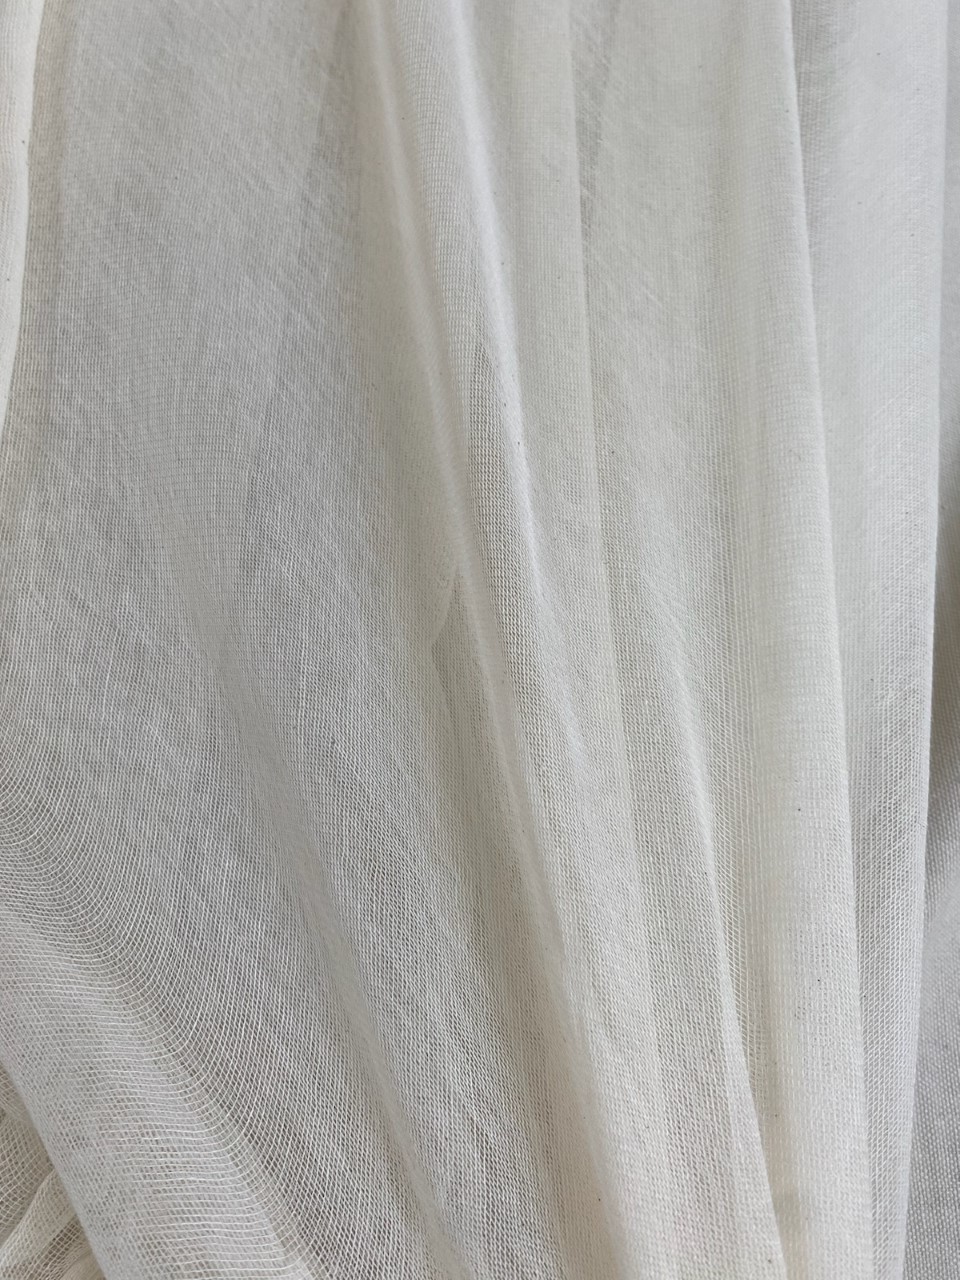 87" Wide Grade 40 Natural Cheesecloth 2 Yards